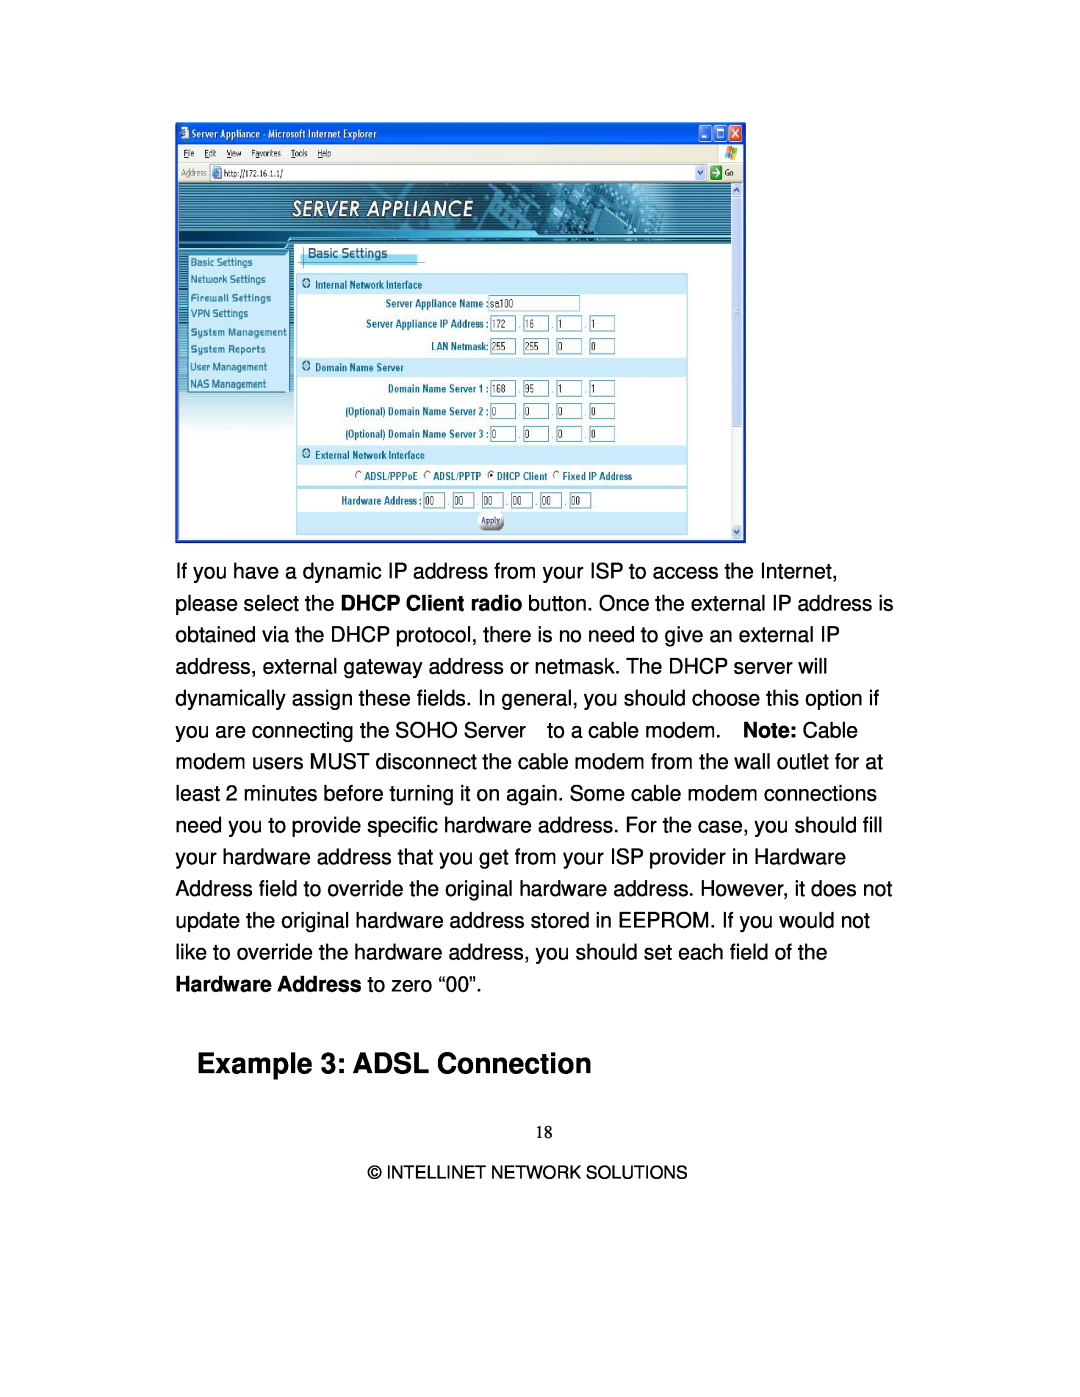 Intellinet Network Solutions 501705 manual Example 3 ADSL Connection 